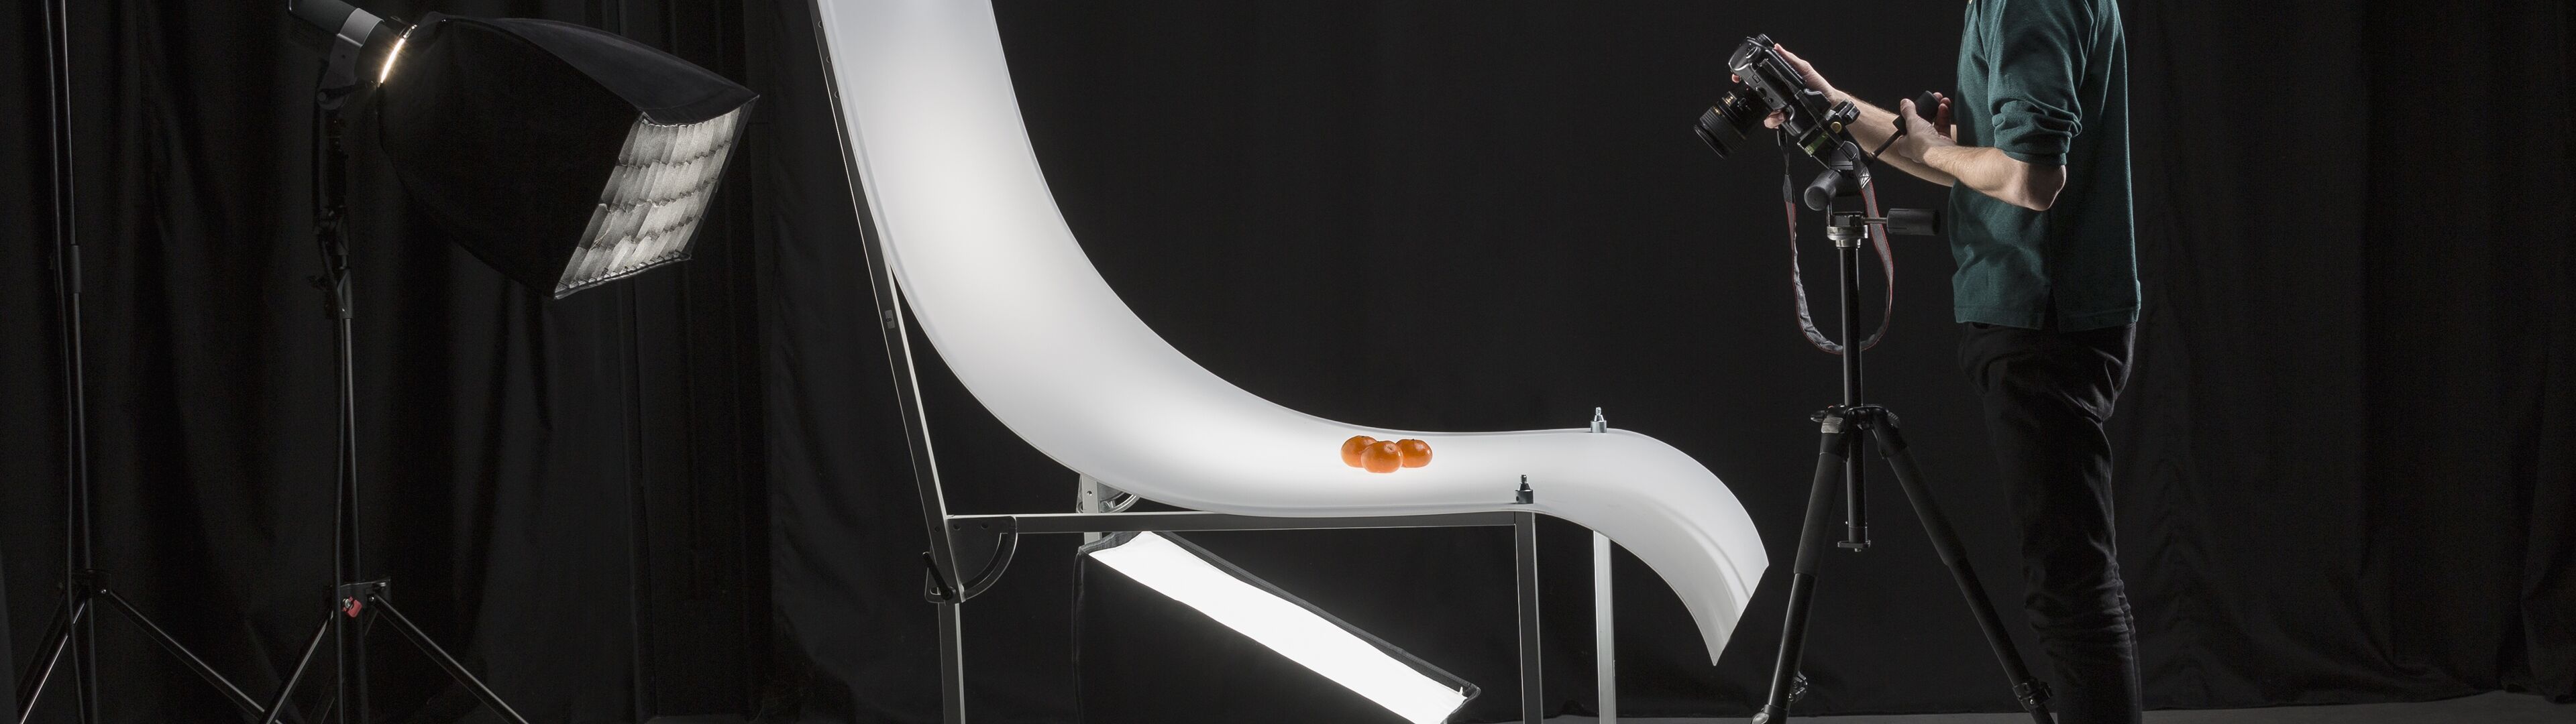 A photographer adjusting equipment in a professional studio for product photography, with lighting and a white backdrop.